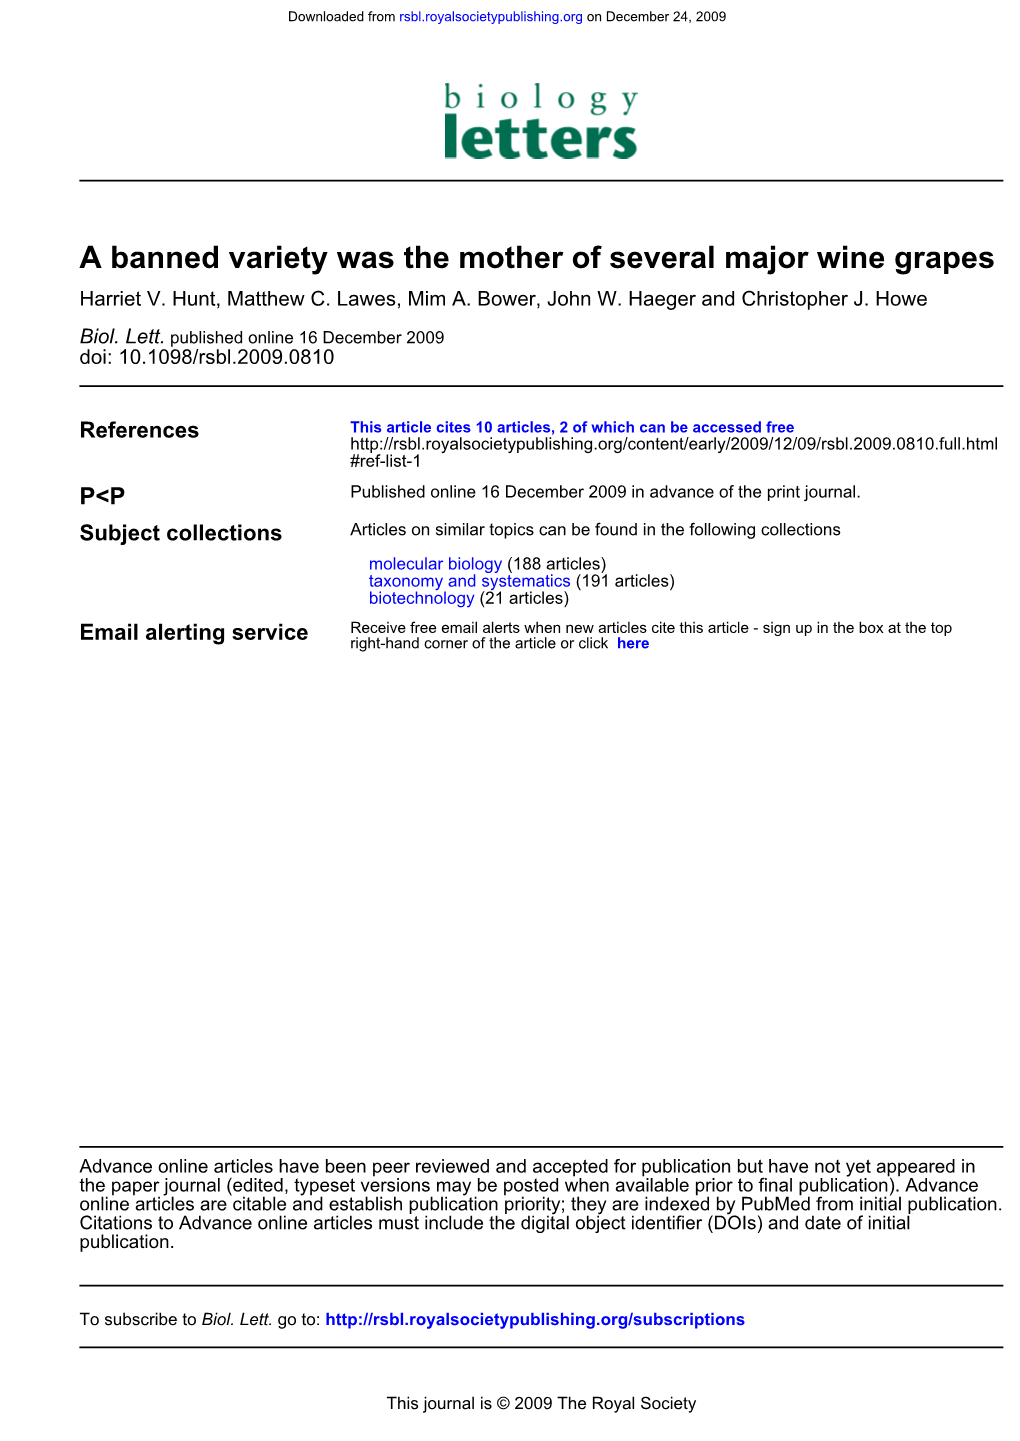 A Banned Variety Was the Mother of Several Major Wine Grapes